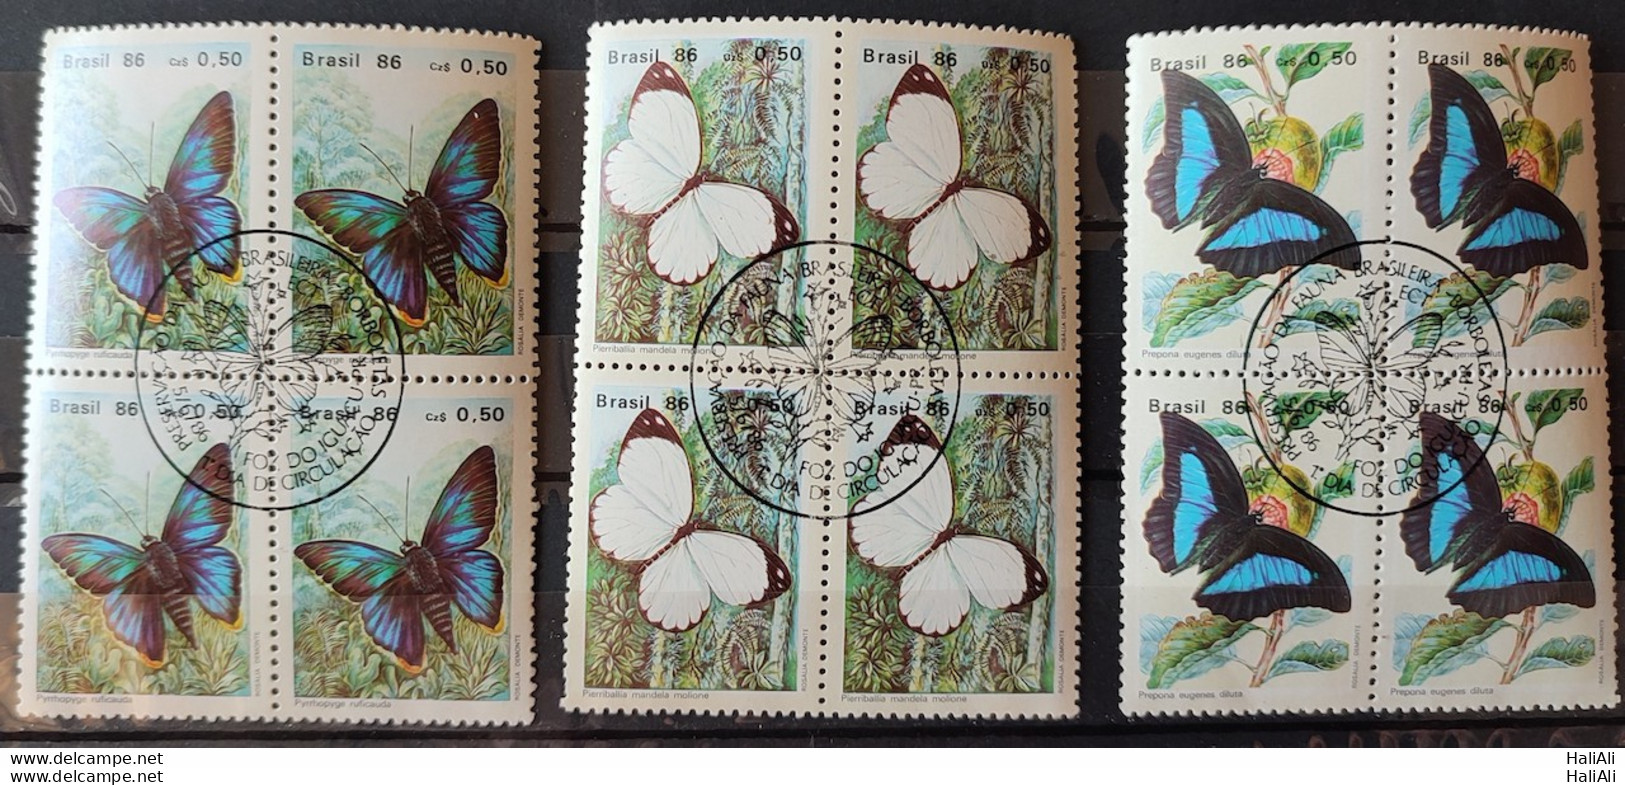 C 1512 Brazil Stamp Butterfly Insects 1986 Block Of 4 CBC PR Complete Series 2.jpg - Ungebraucht